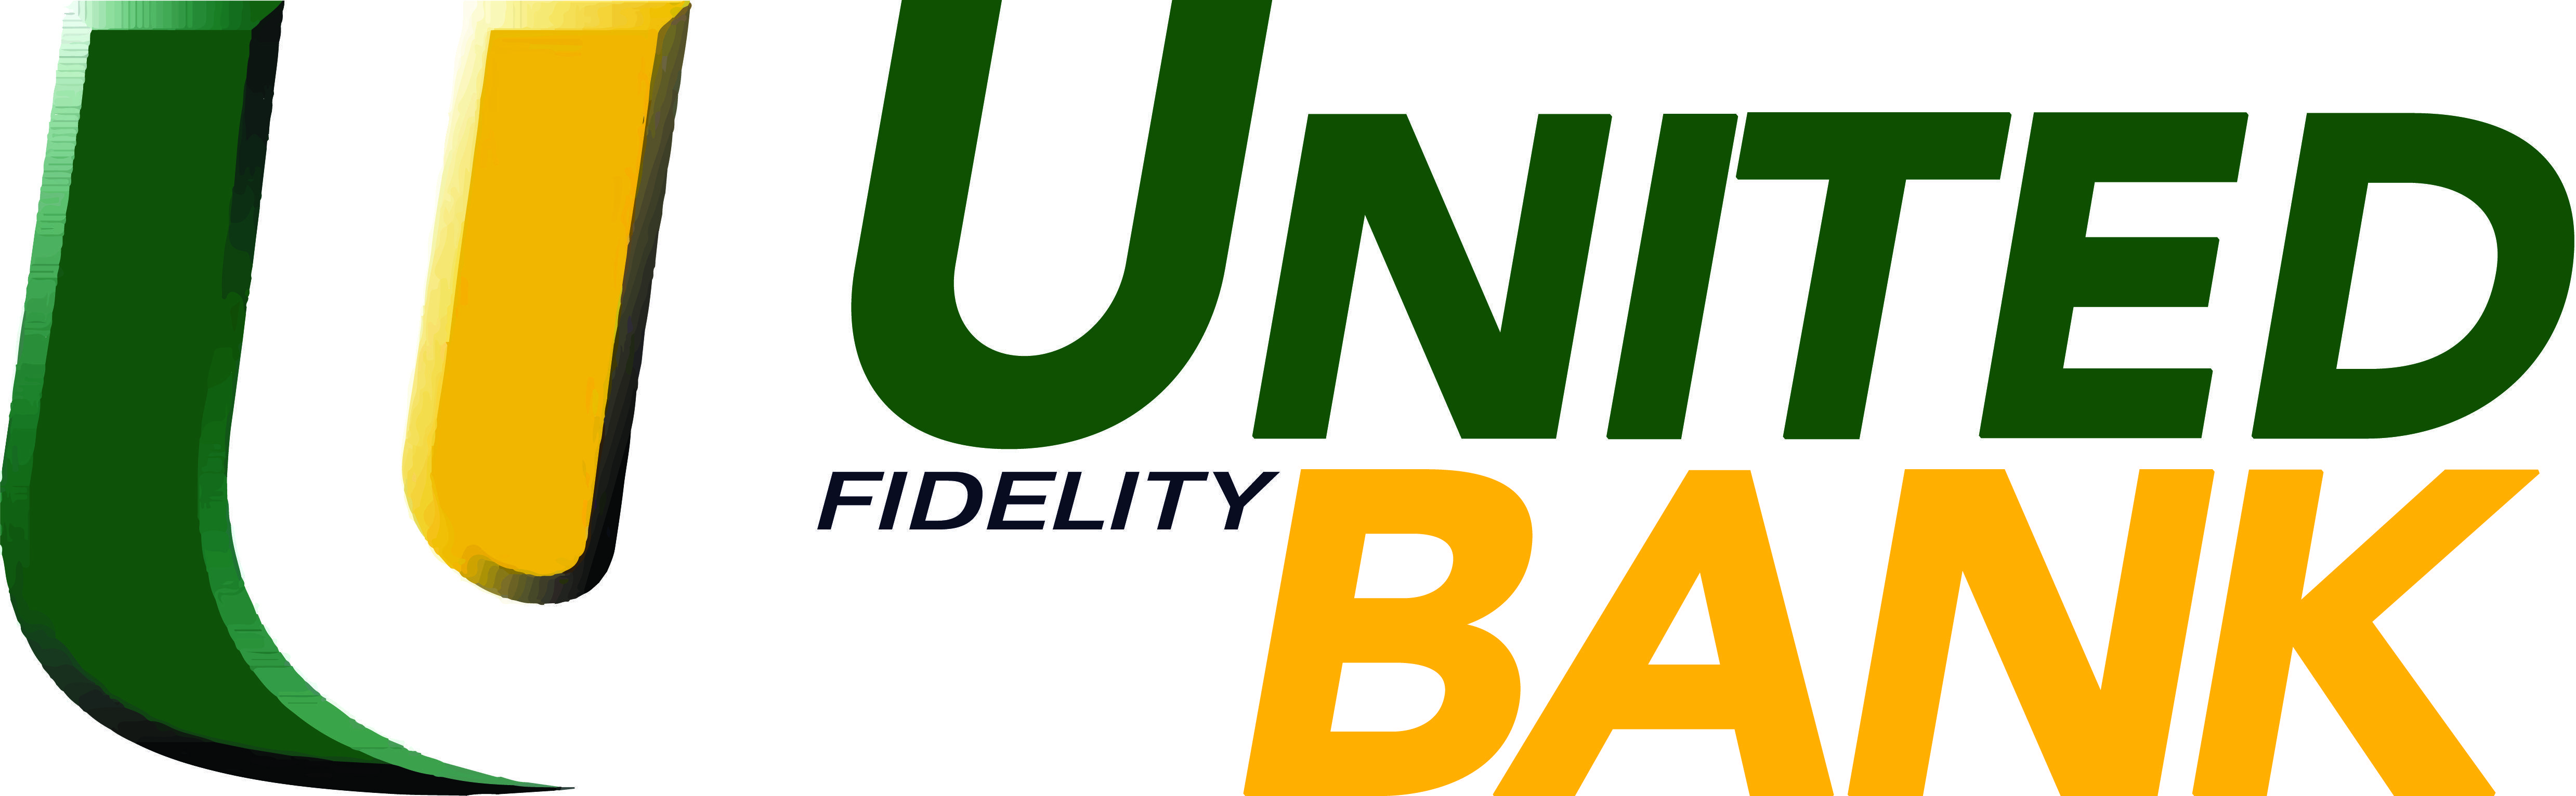 Green and Yellow Bank Logo - UNITED FIDELITY BANK TO REOPEN LOBBY OF HALSTED BRANCH. Chicago